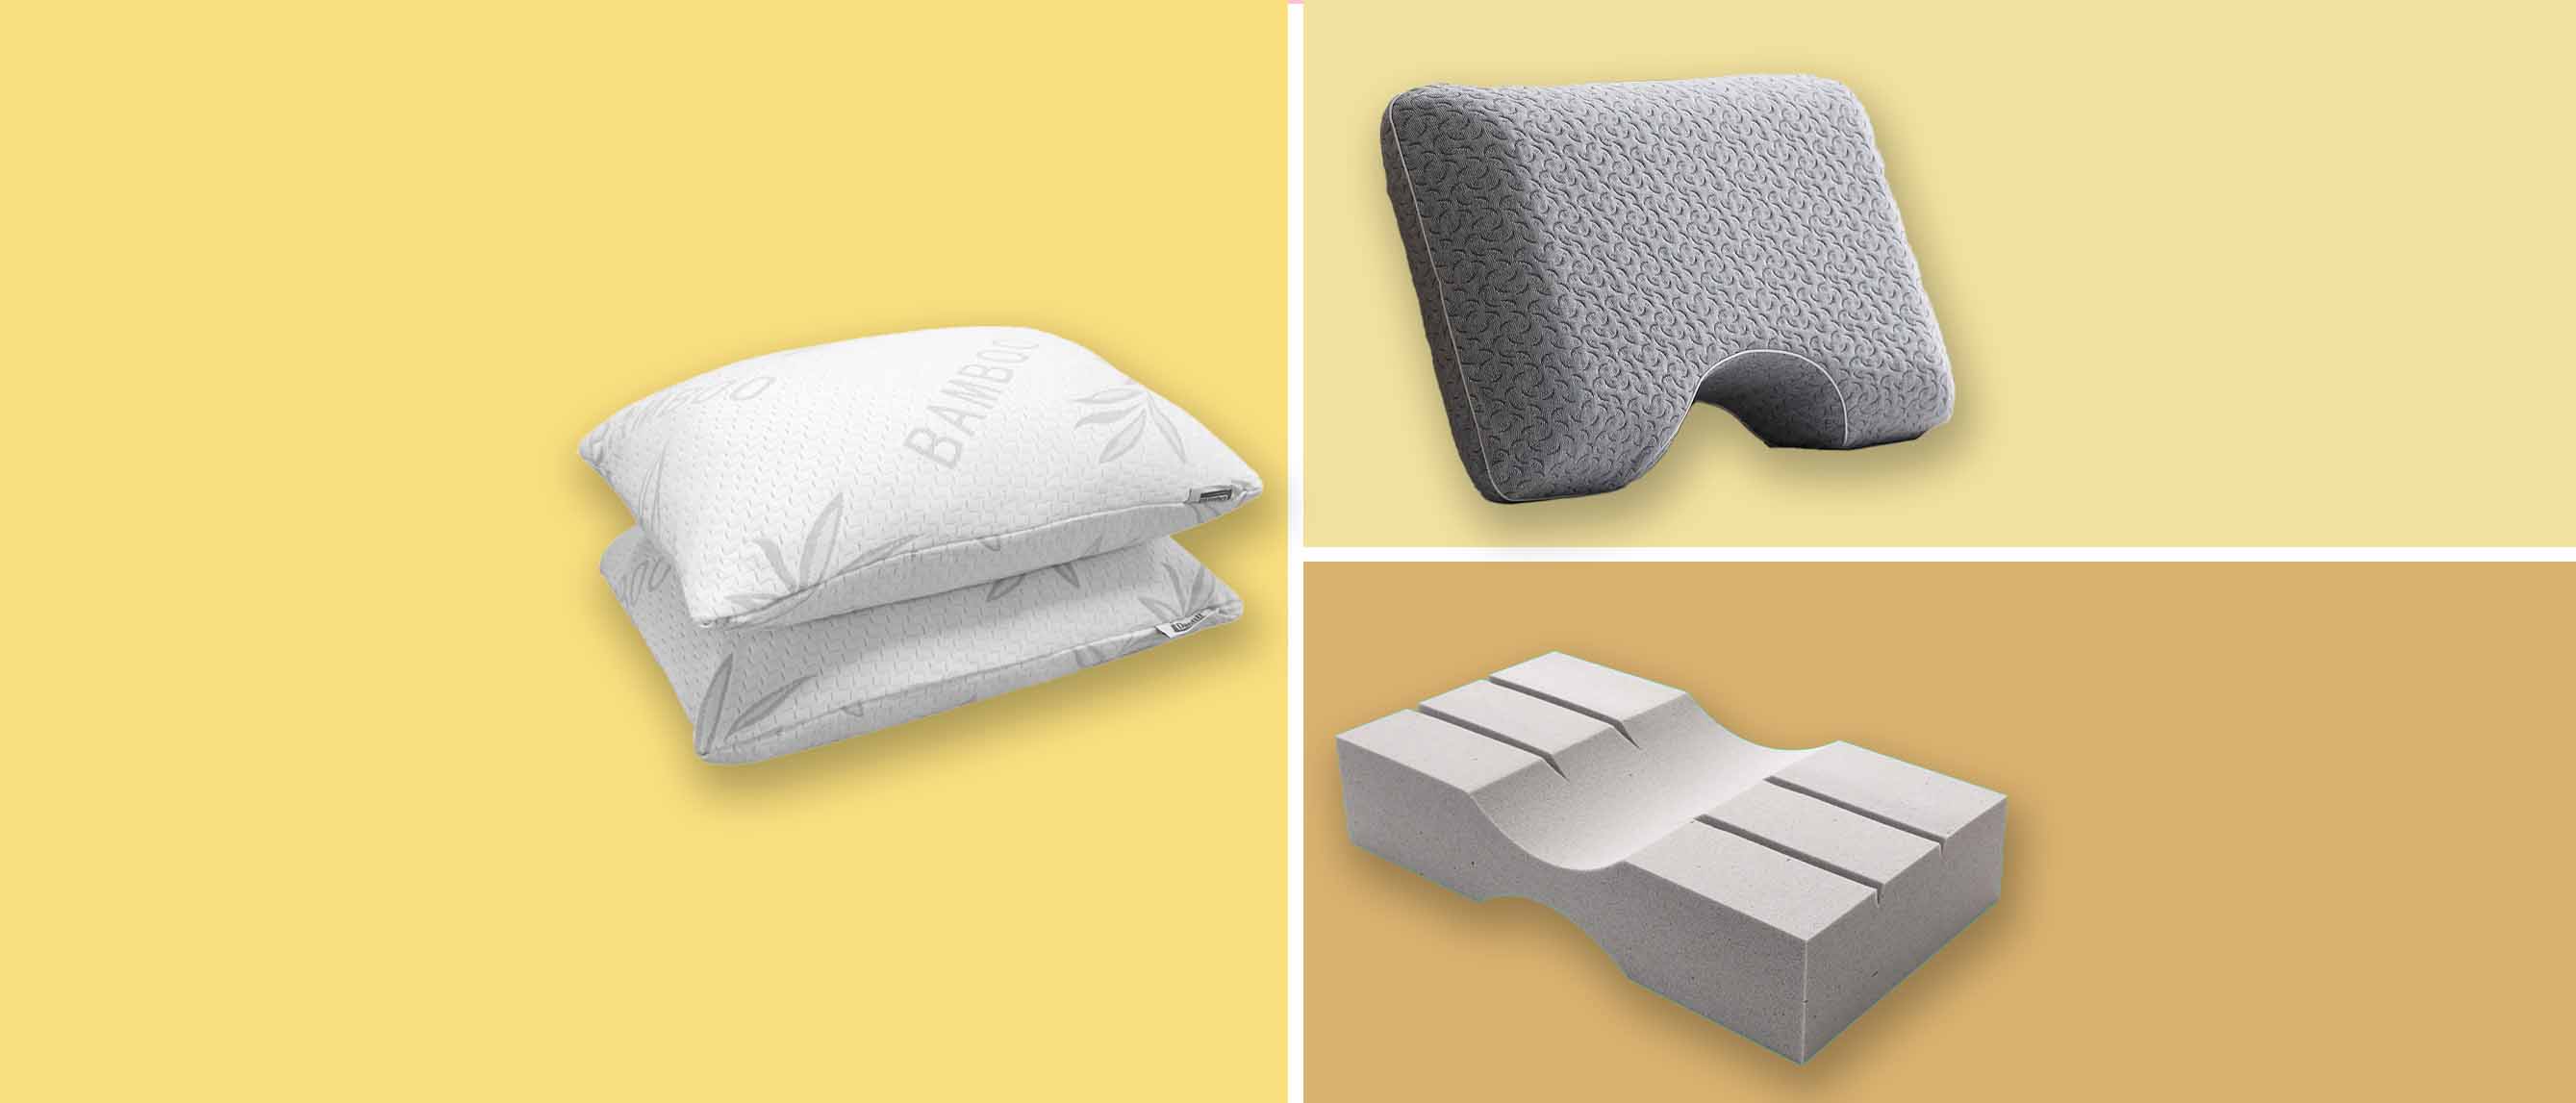 three pillows from Wayfair, Allswell and Pillow Cube